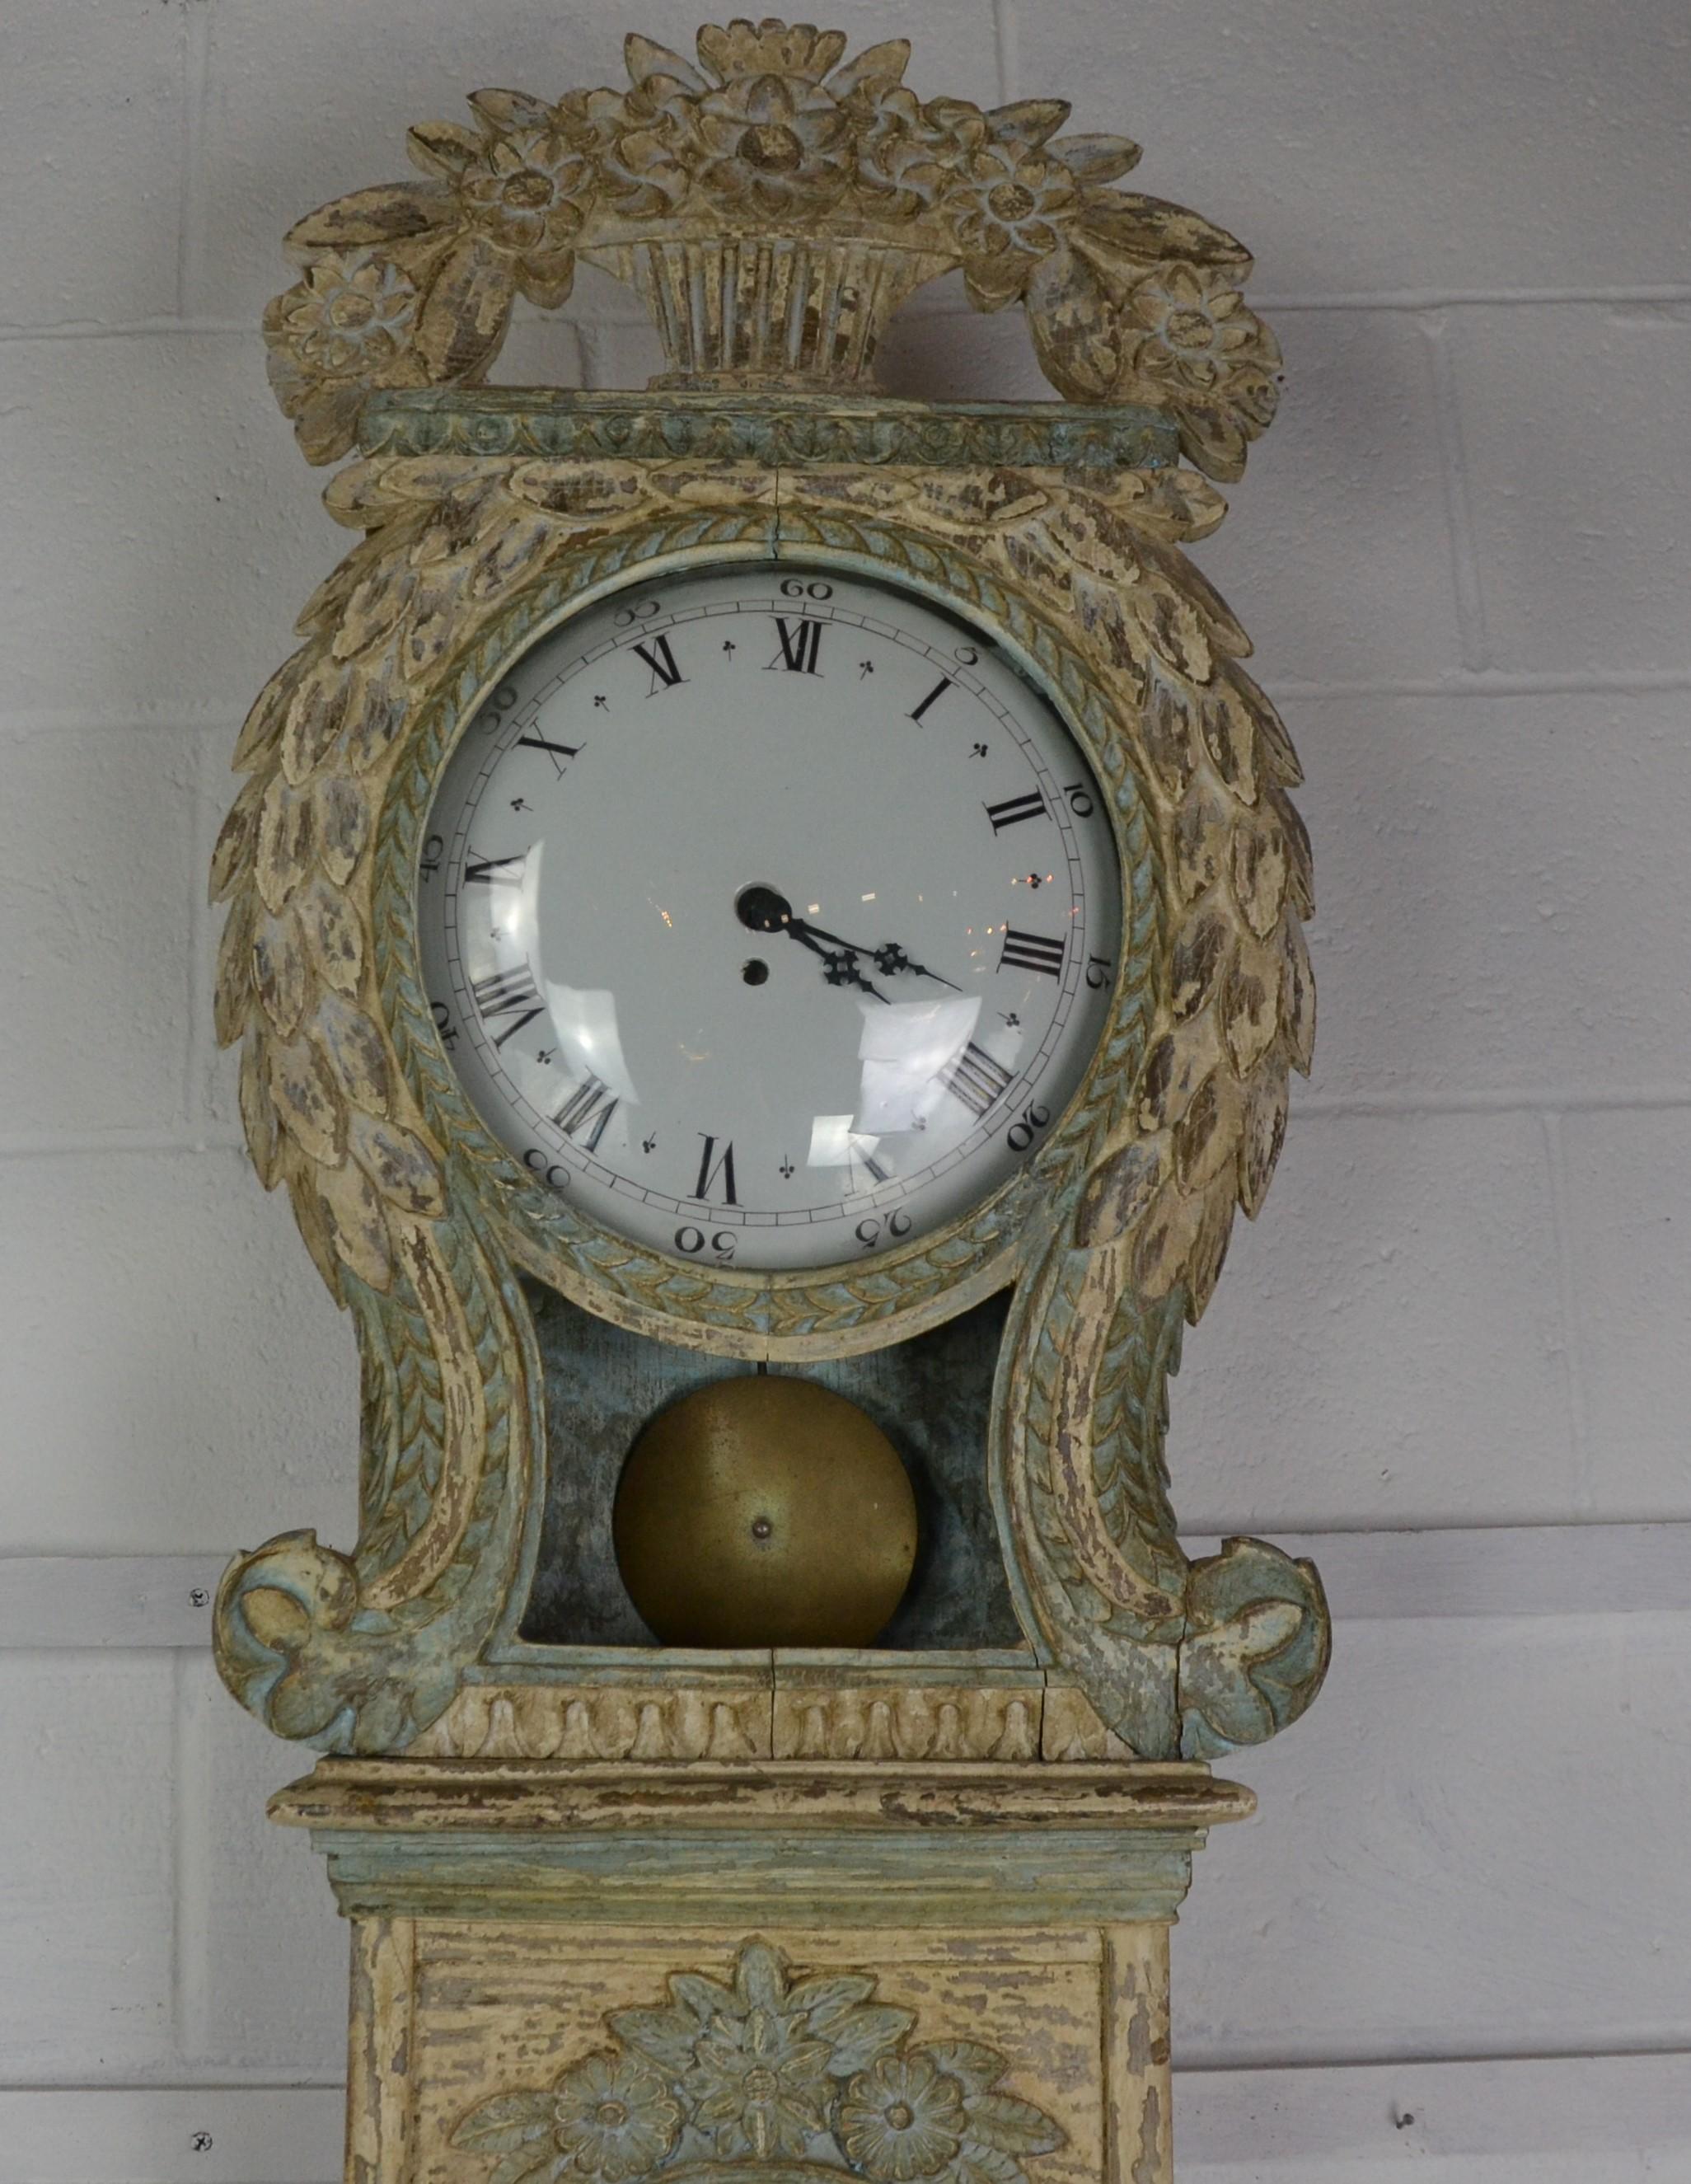 A Gustavian style grandfather clock in it's original paint, mid-20th century, porcelain face with 30 hr movement and faux pendulum.